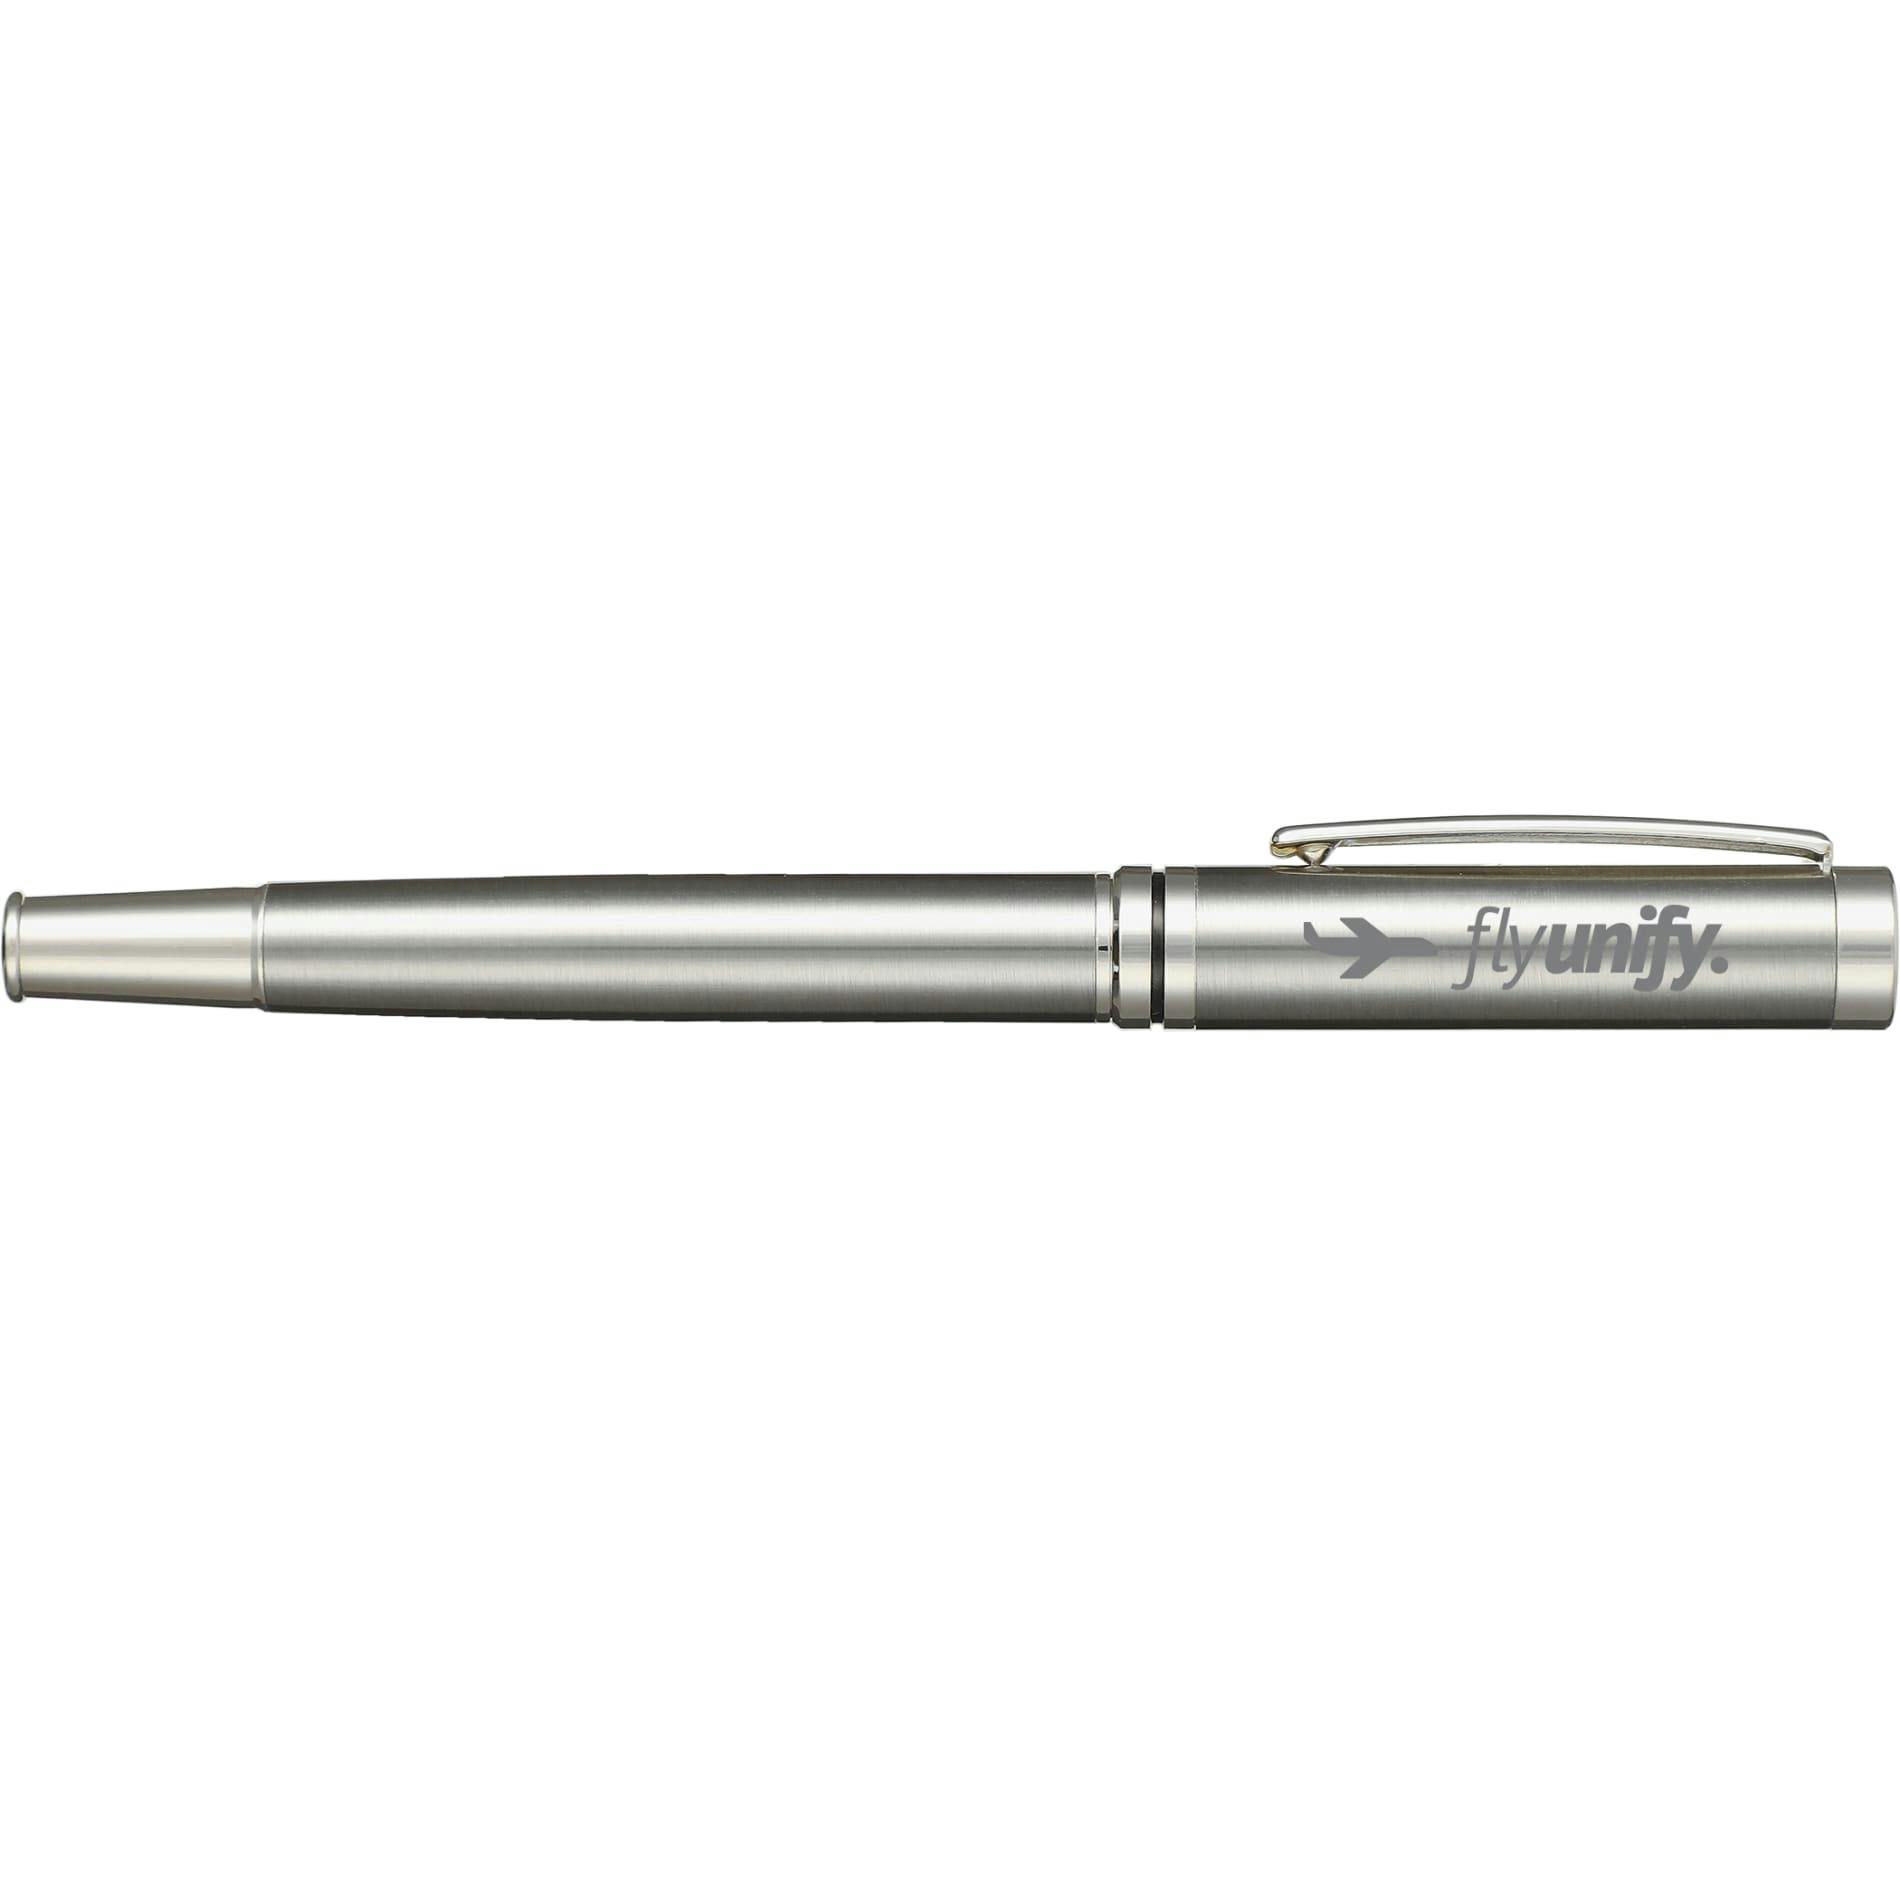 Recycled Stainless Steel Rollerball Pen - additional Image 2